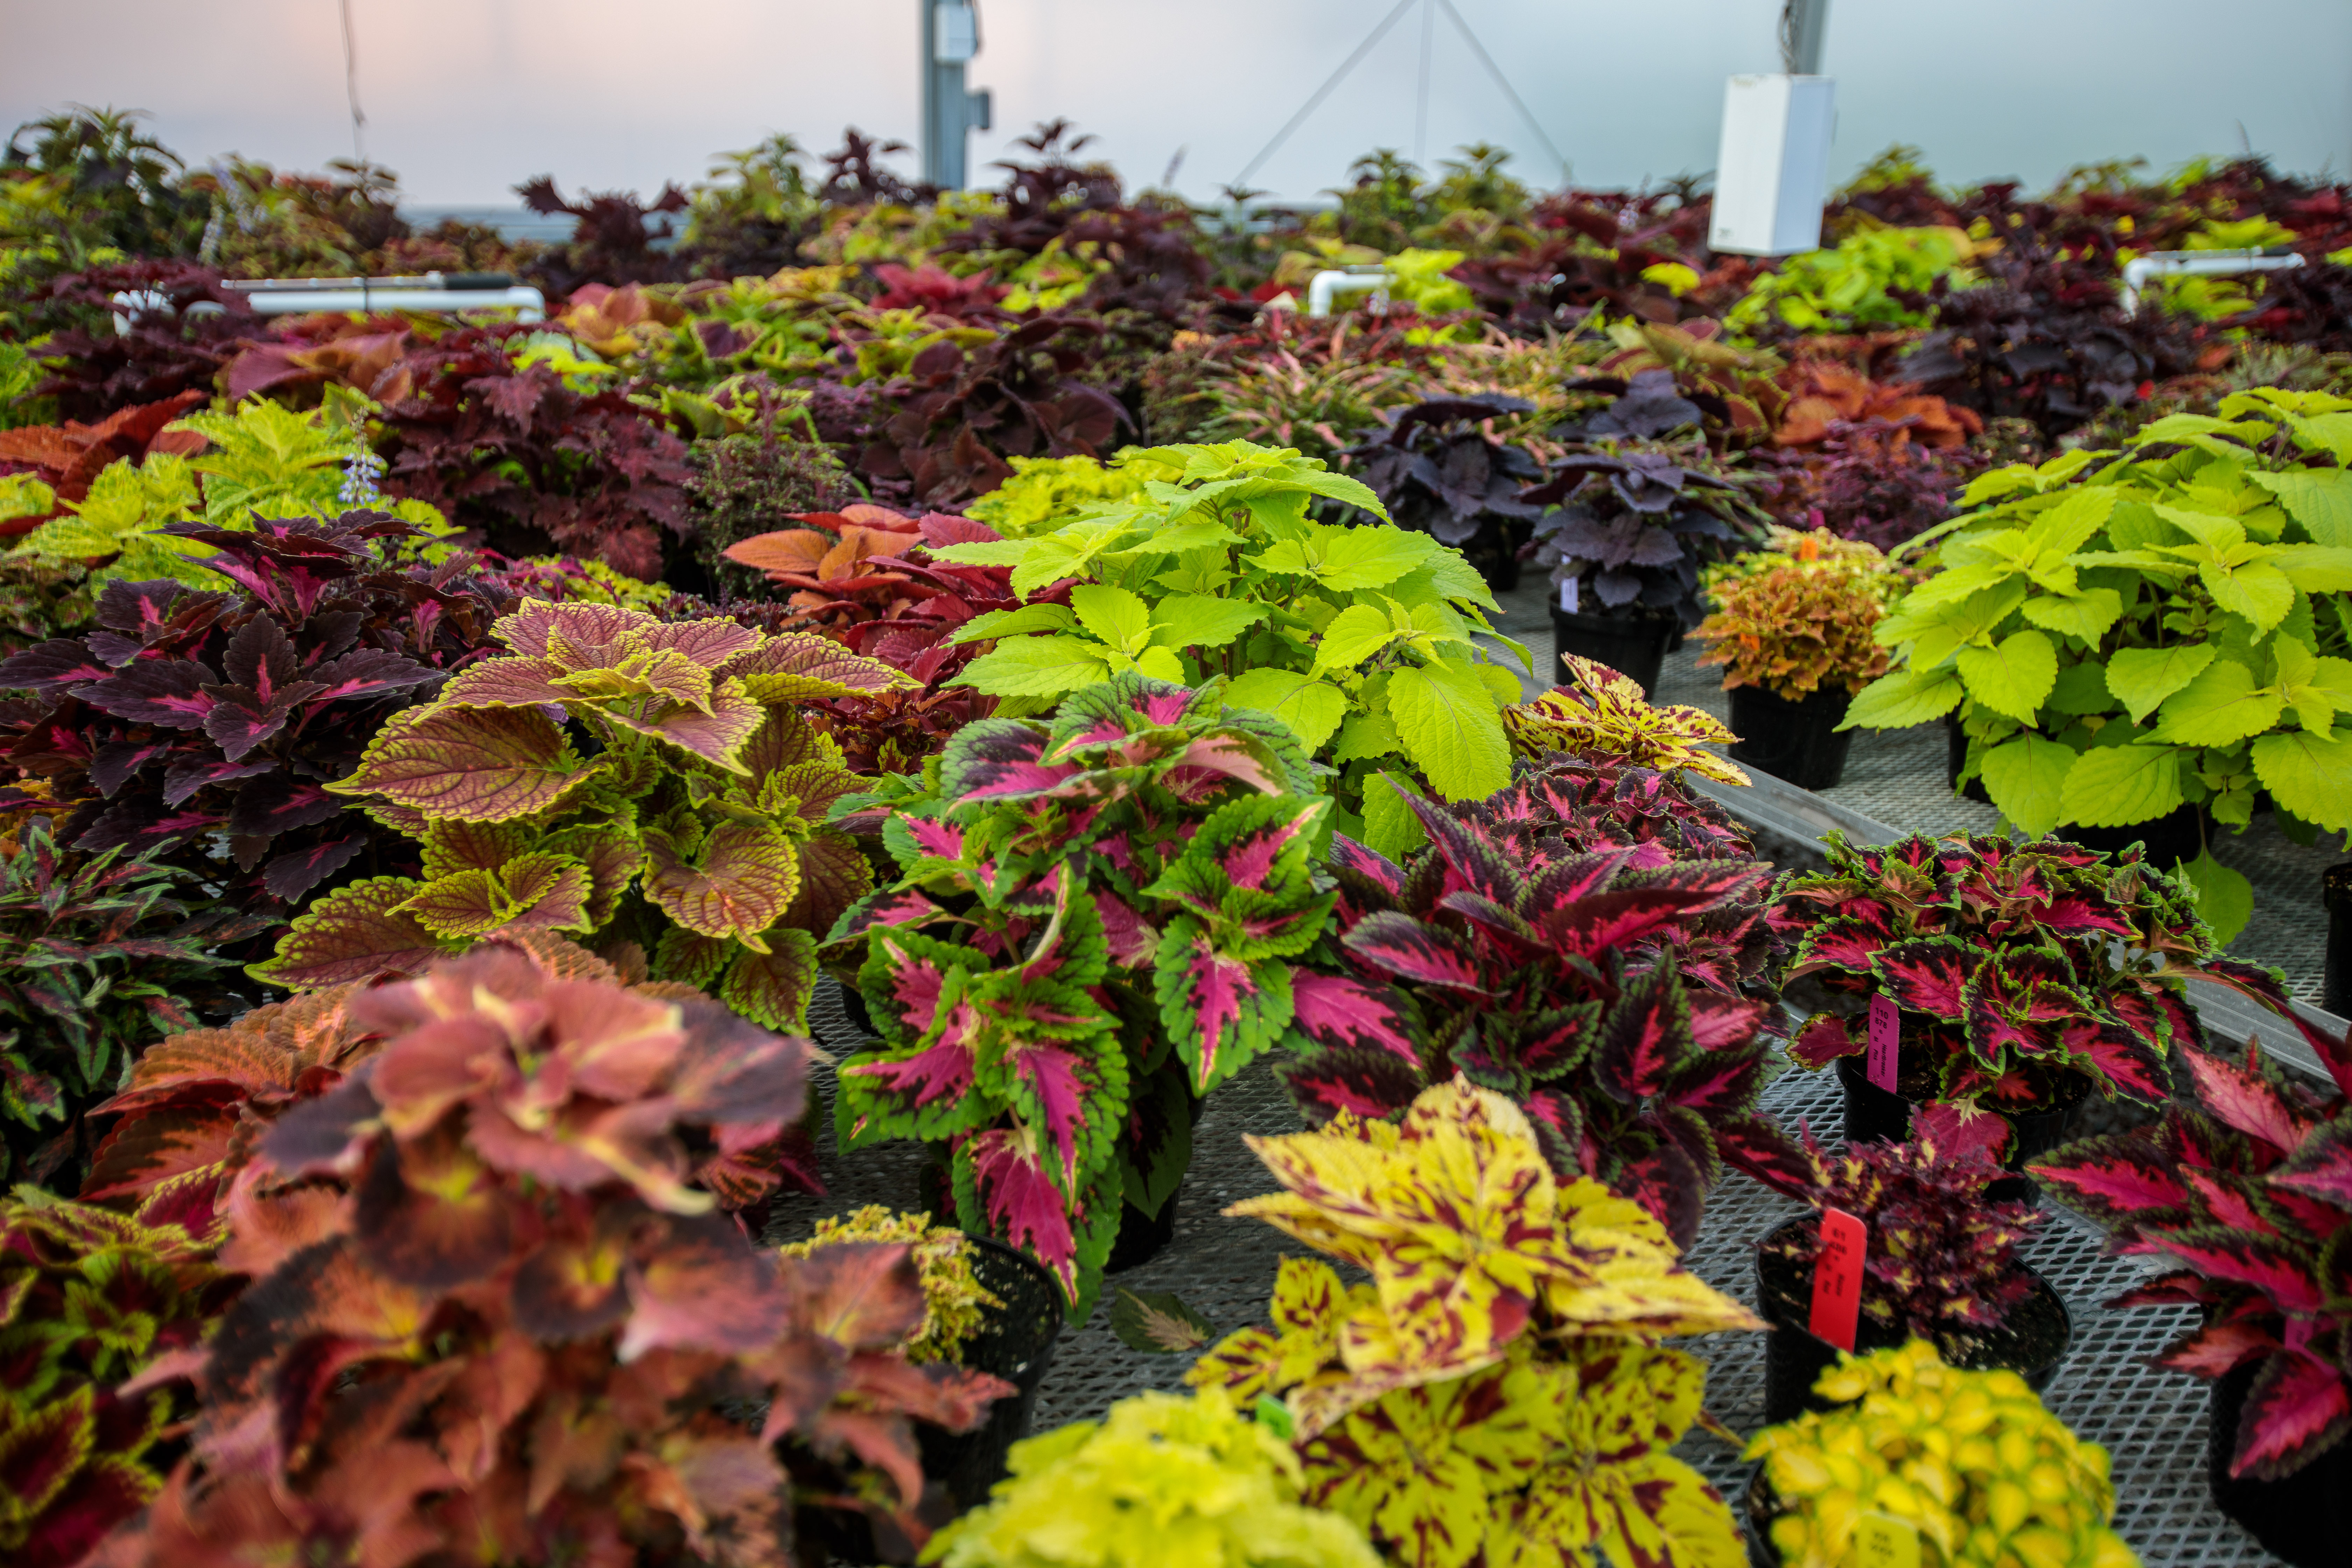 Some of the 111 cultivars being evaluated by scientists at the University of Kentucky. Photo by Matt Barton